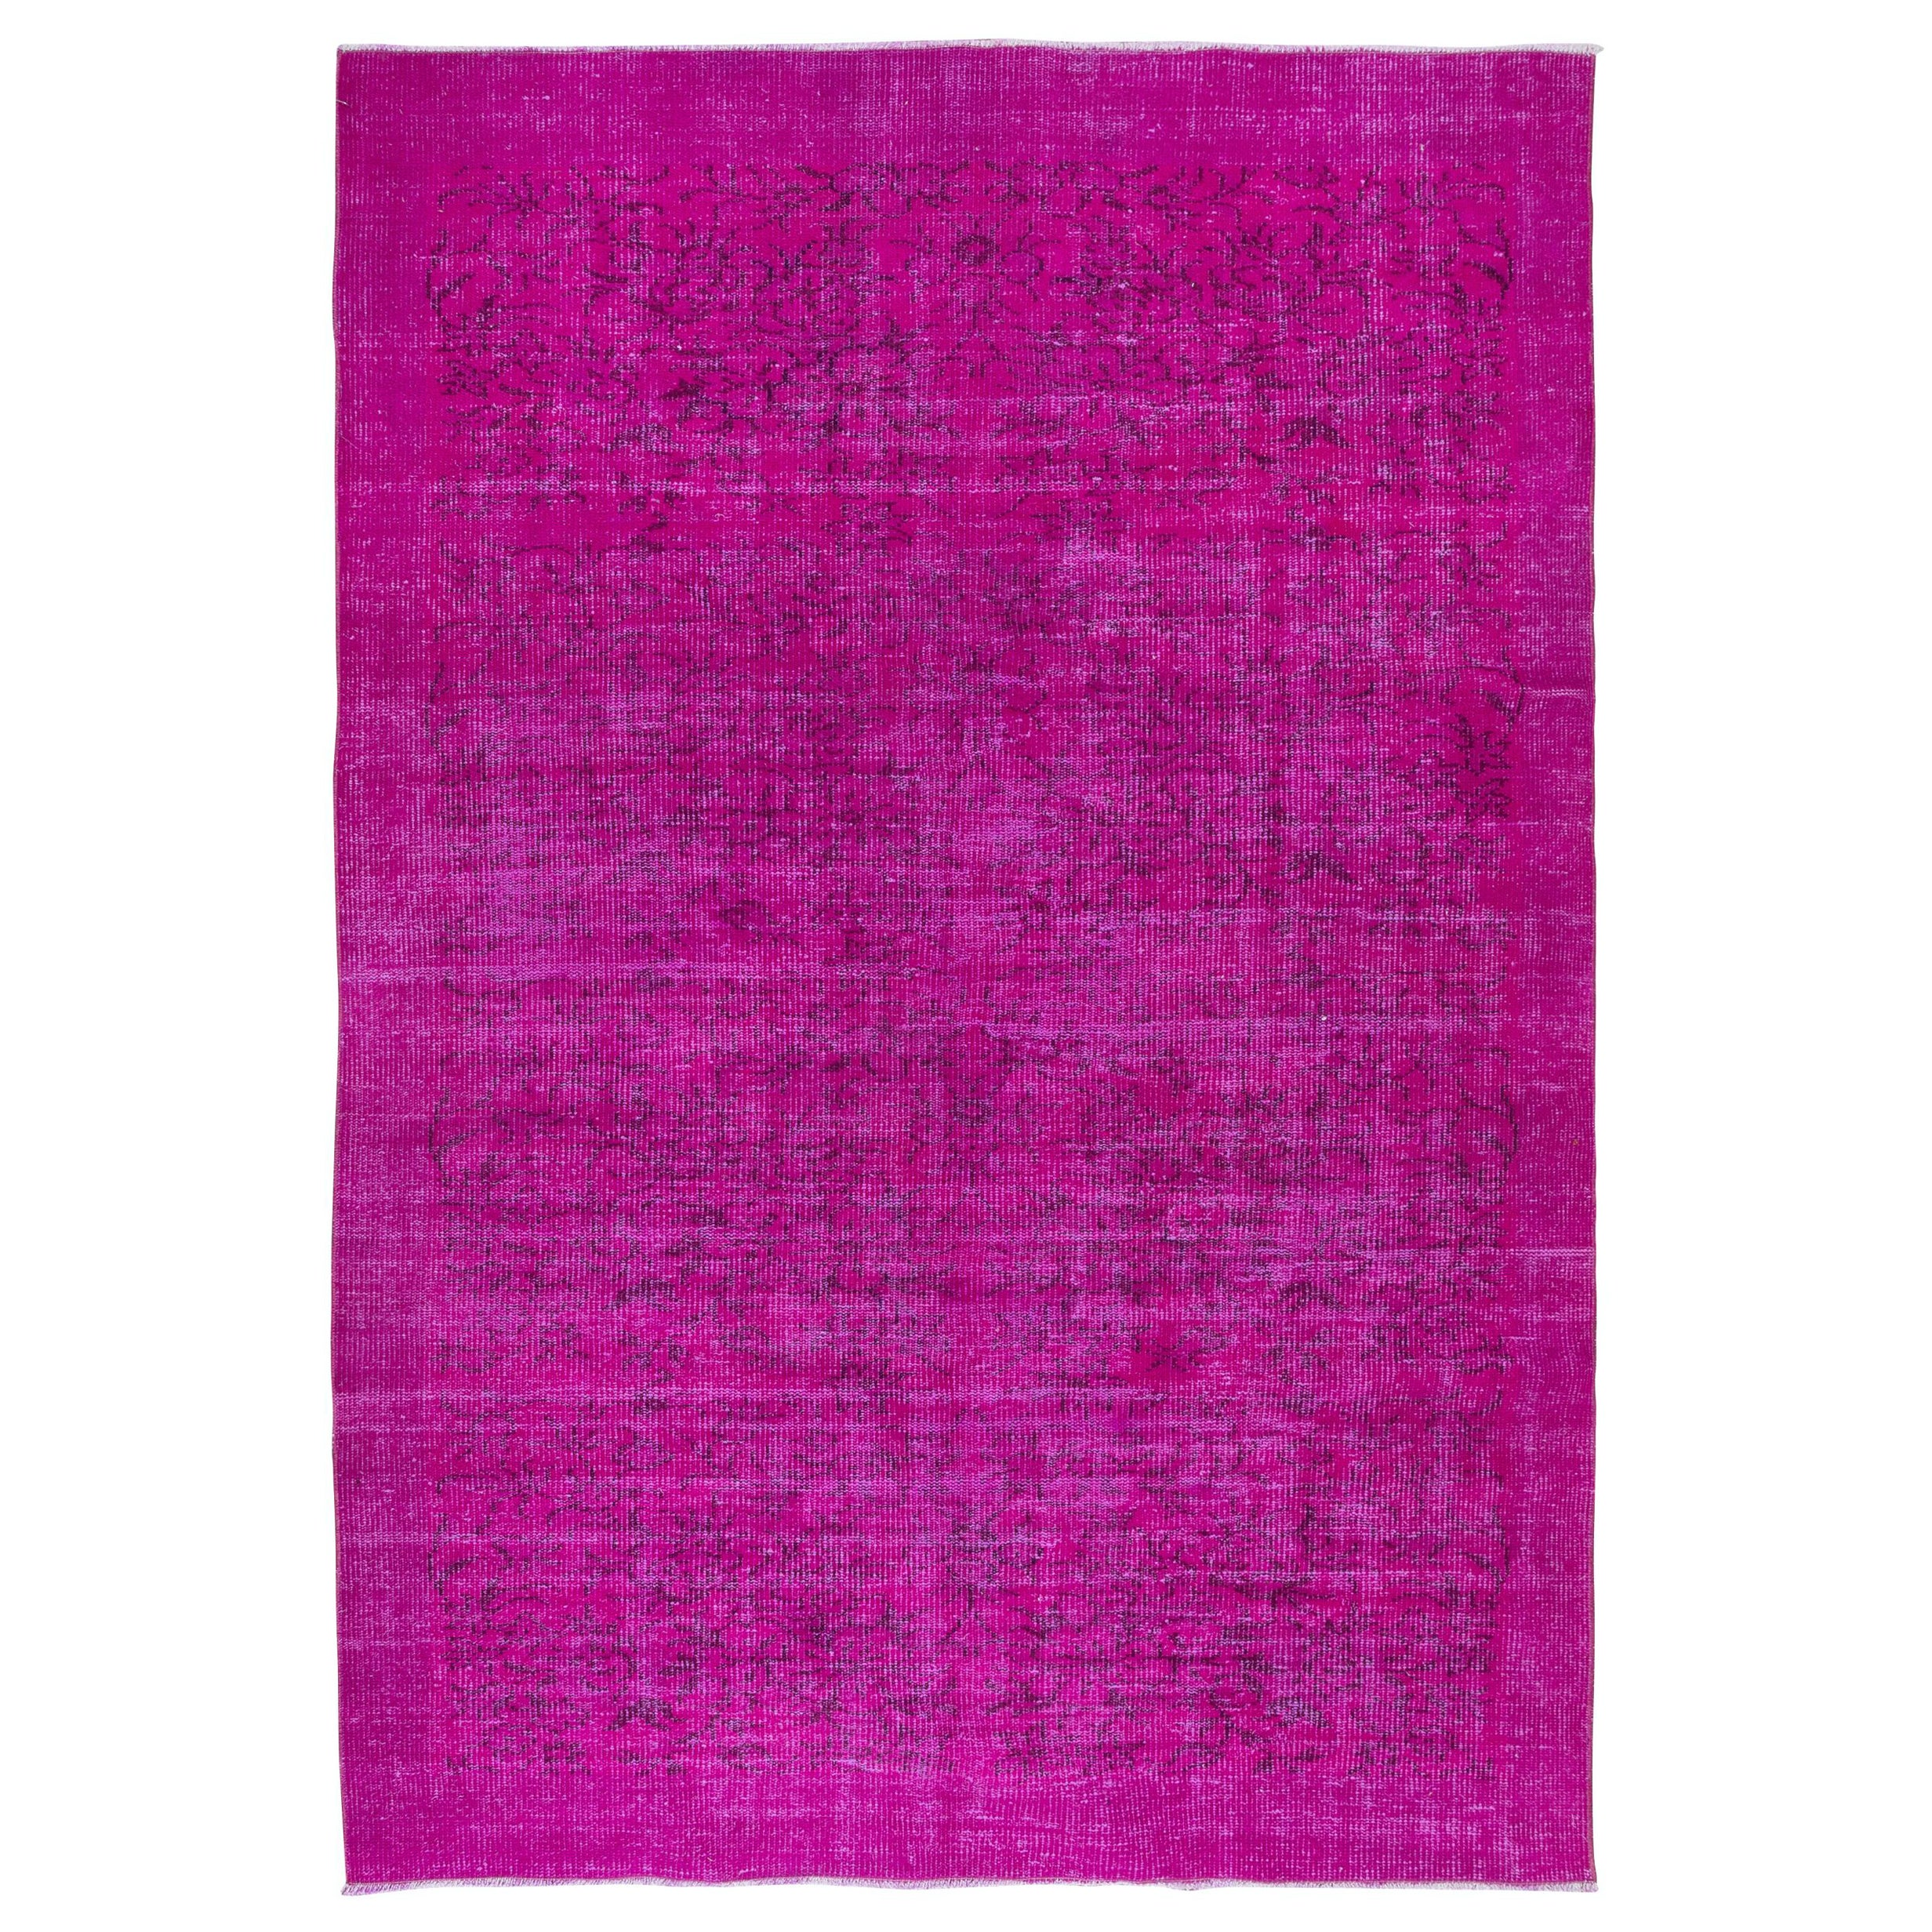 5.8x8.6 Ft Handmade Turkish Floral Rug with Hot Pink Background and Solid Border For Sale